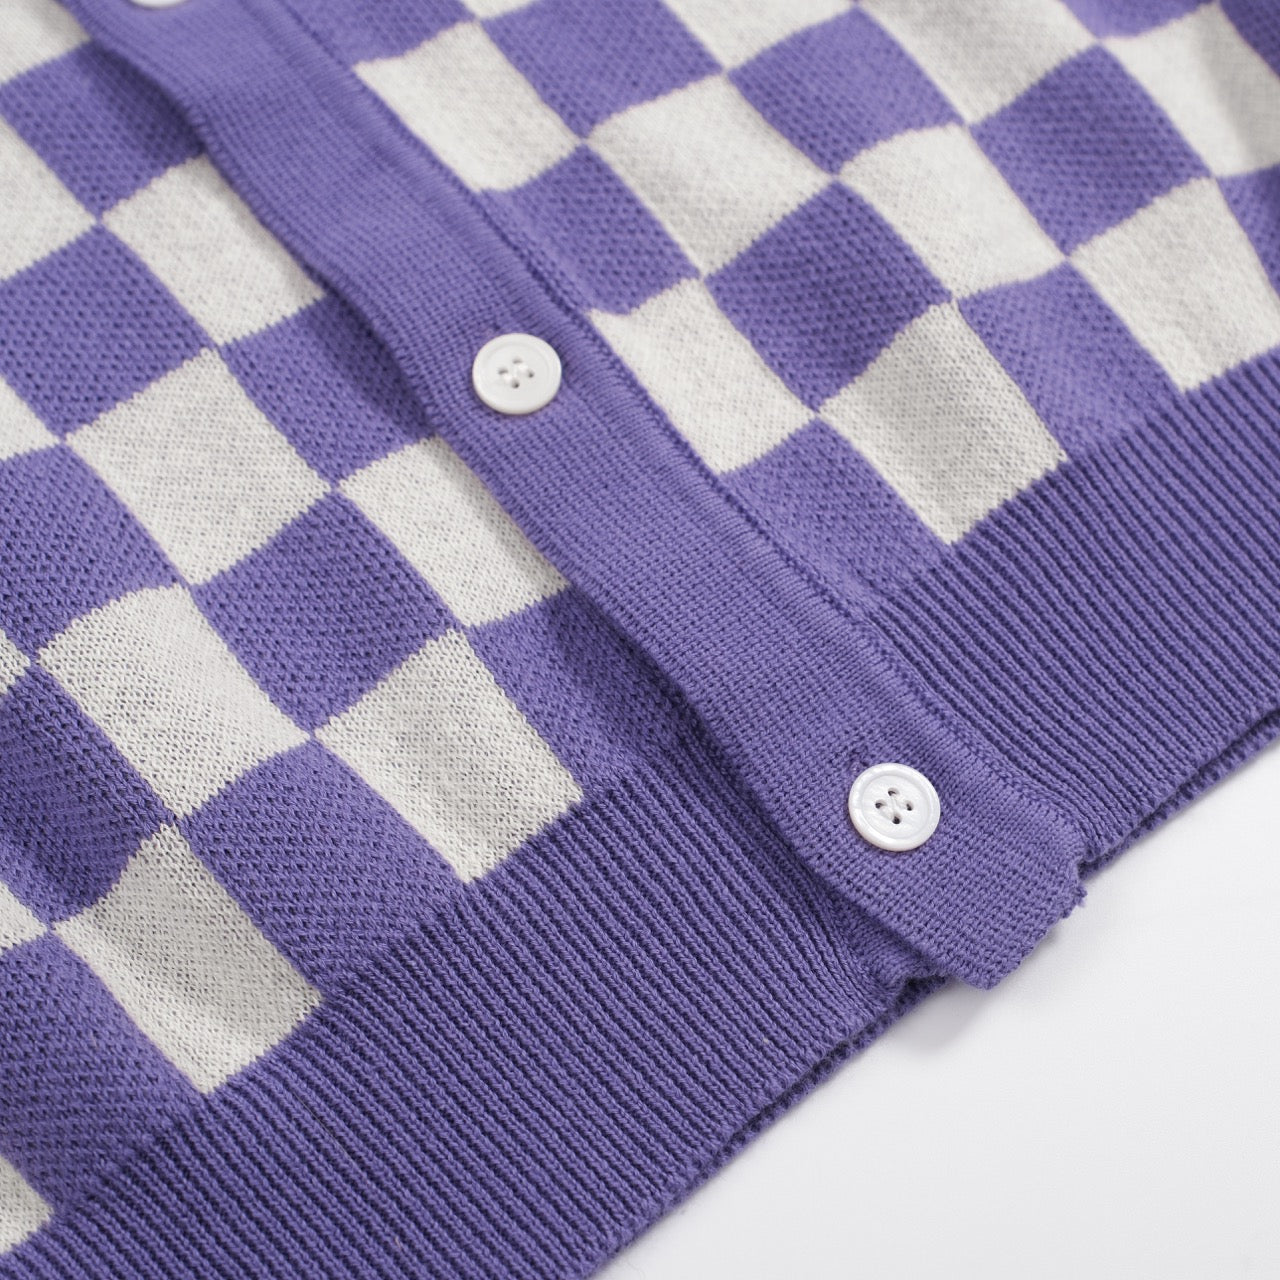 Men's purple plaid knitted short-sleeved polo